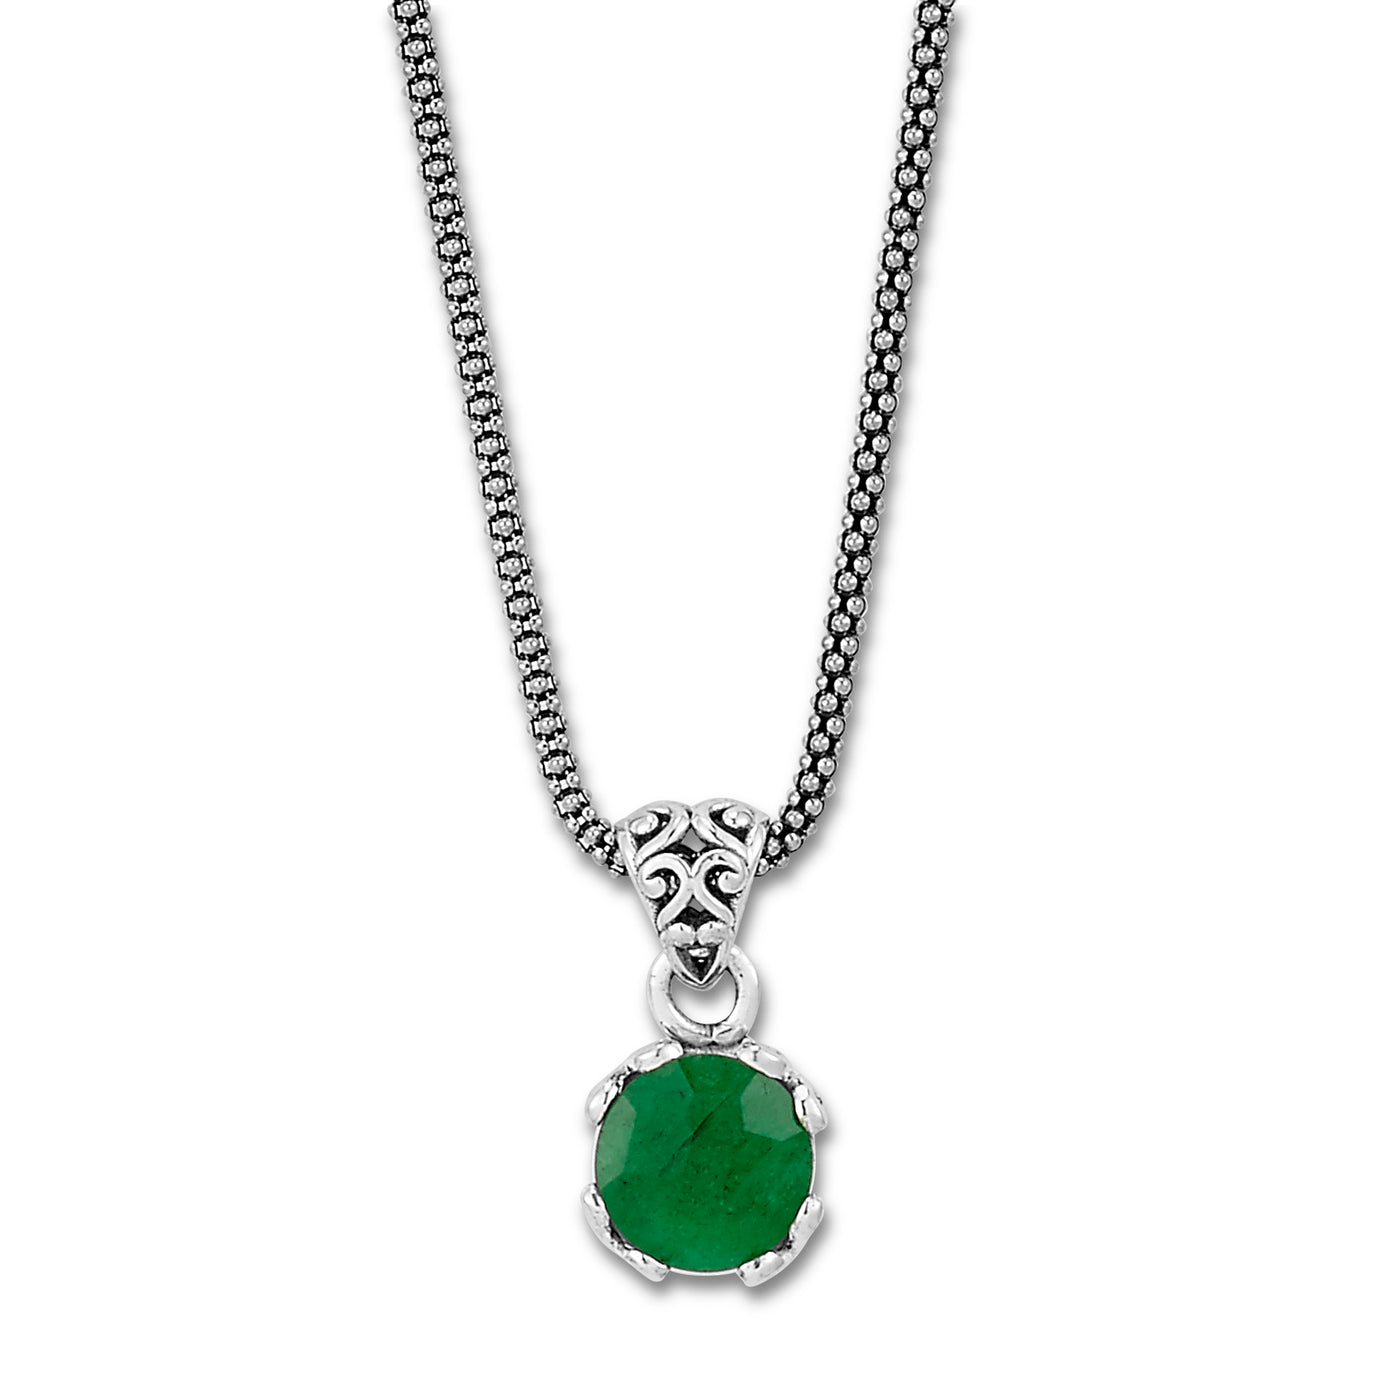 SS 7MM ROUND EMERALD PENDANT ON CHAIN